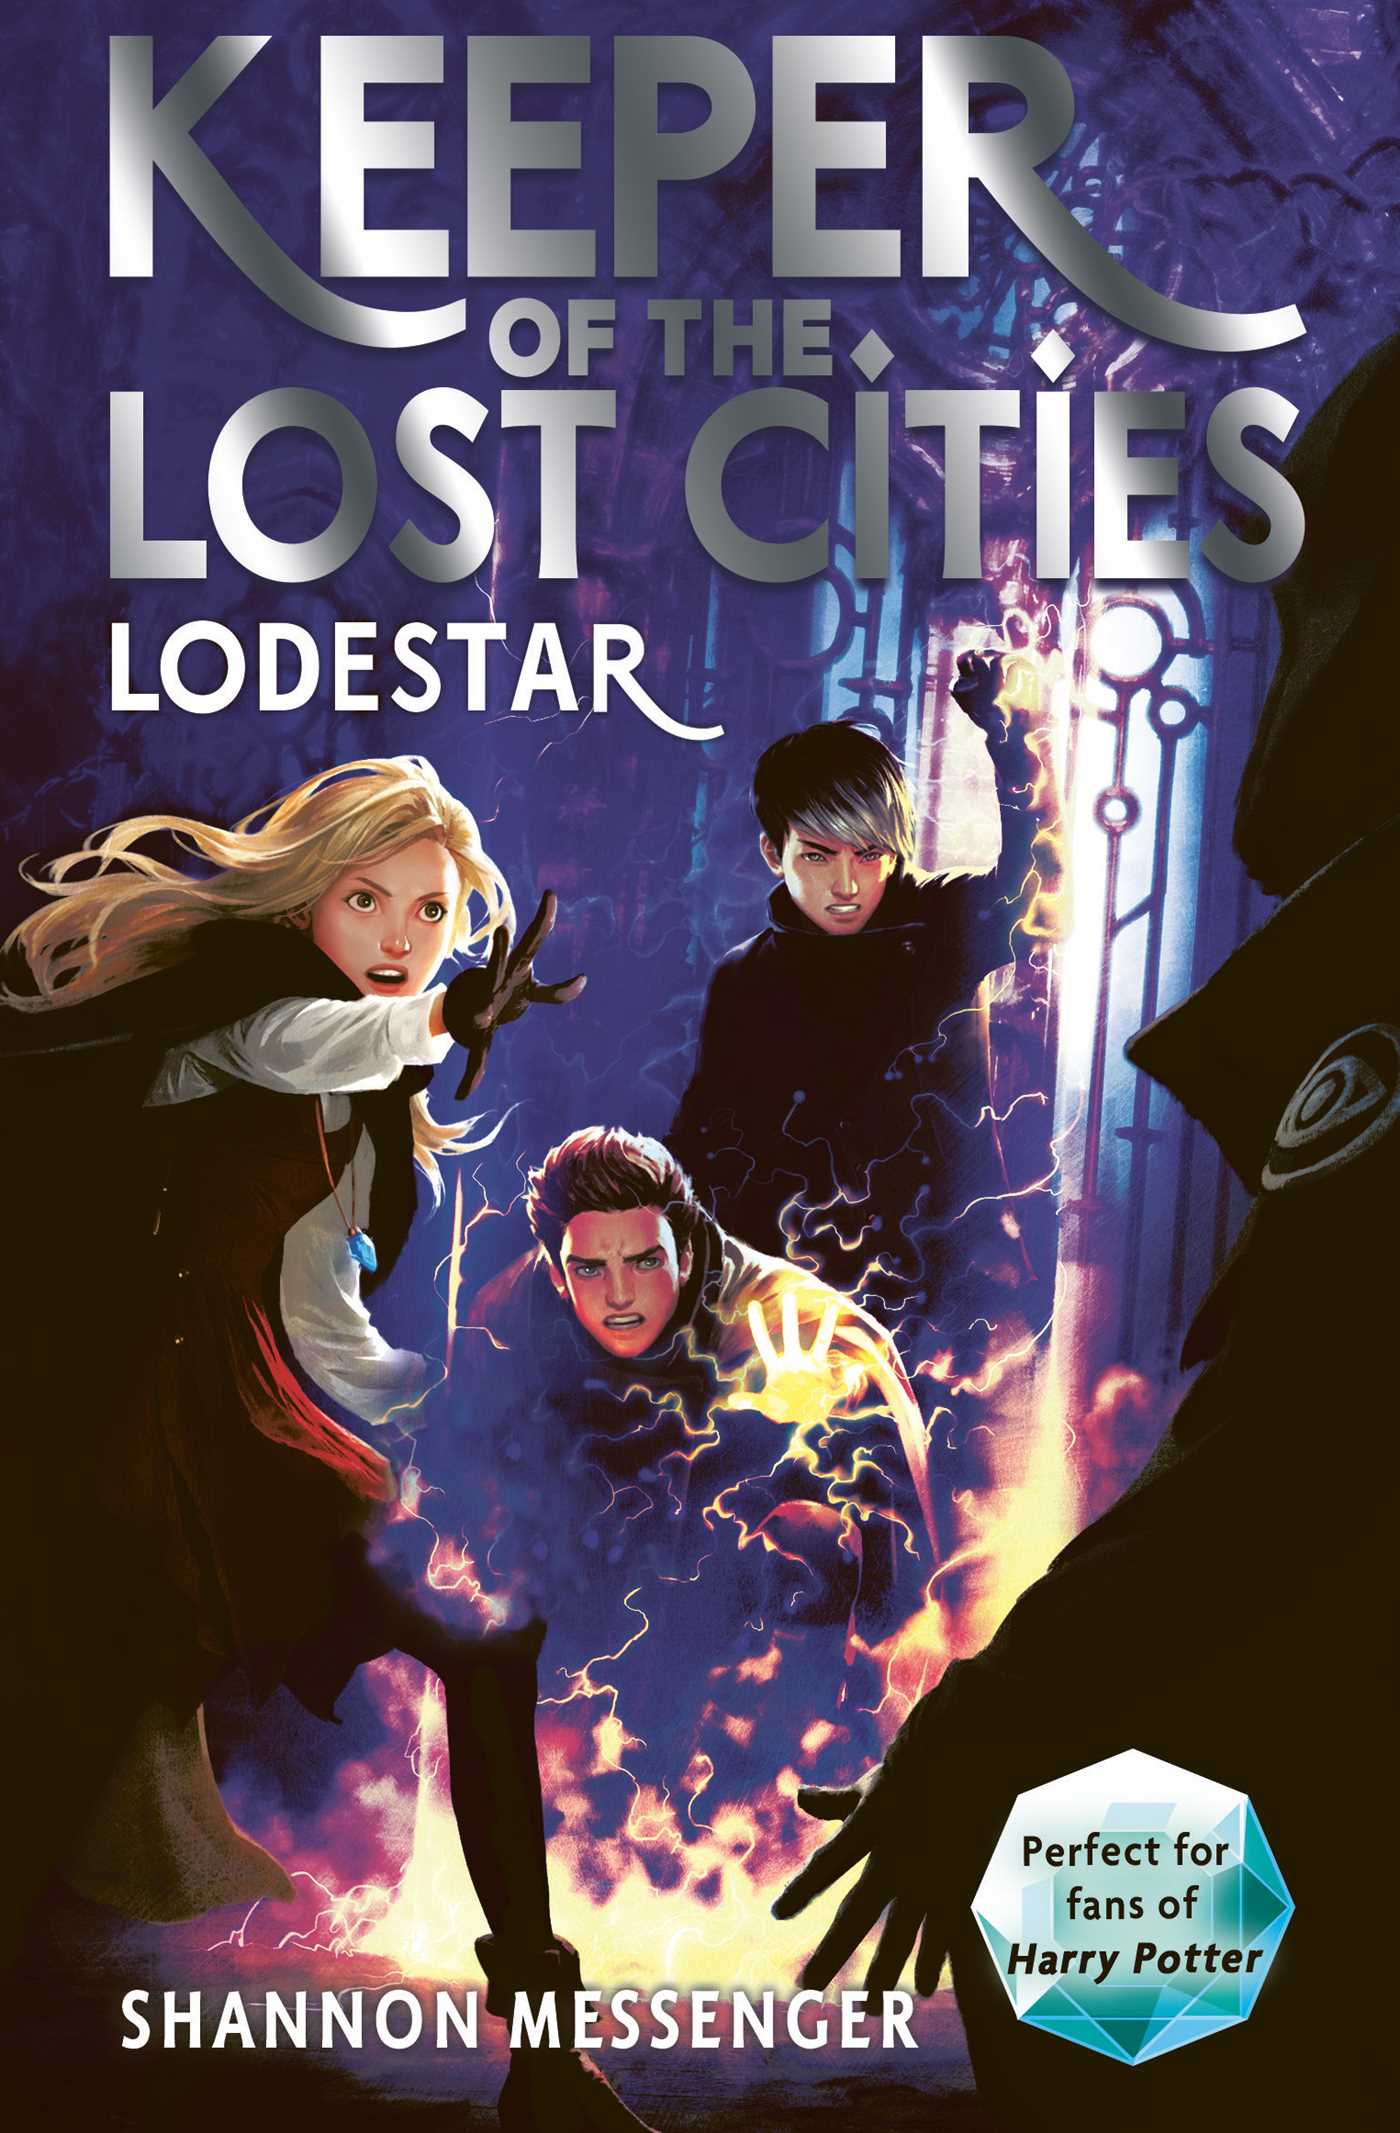 LODESTAR (KEEPER OF THE LOST CITIES BOOK 5)